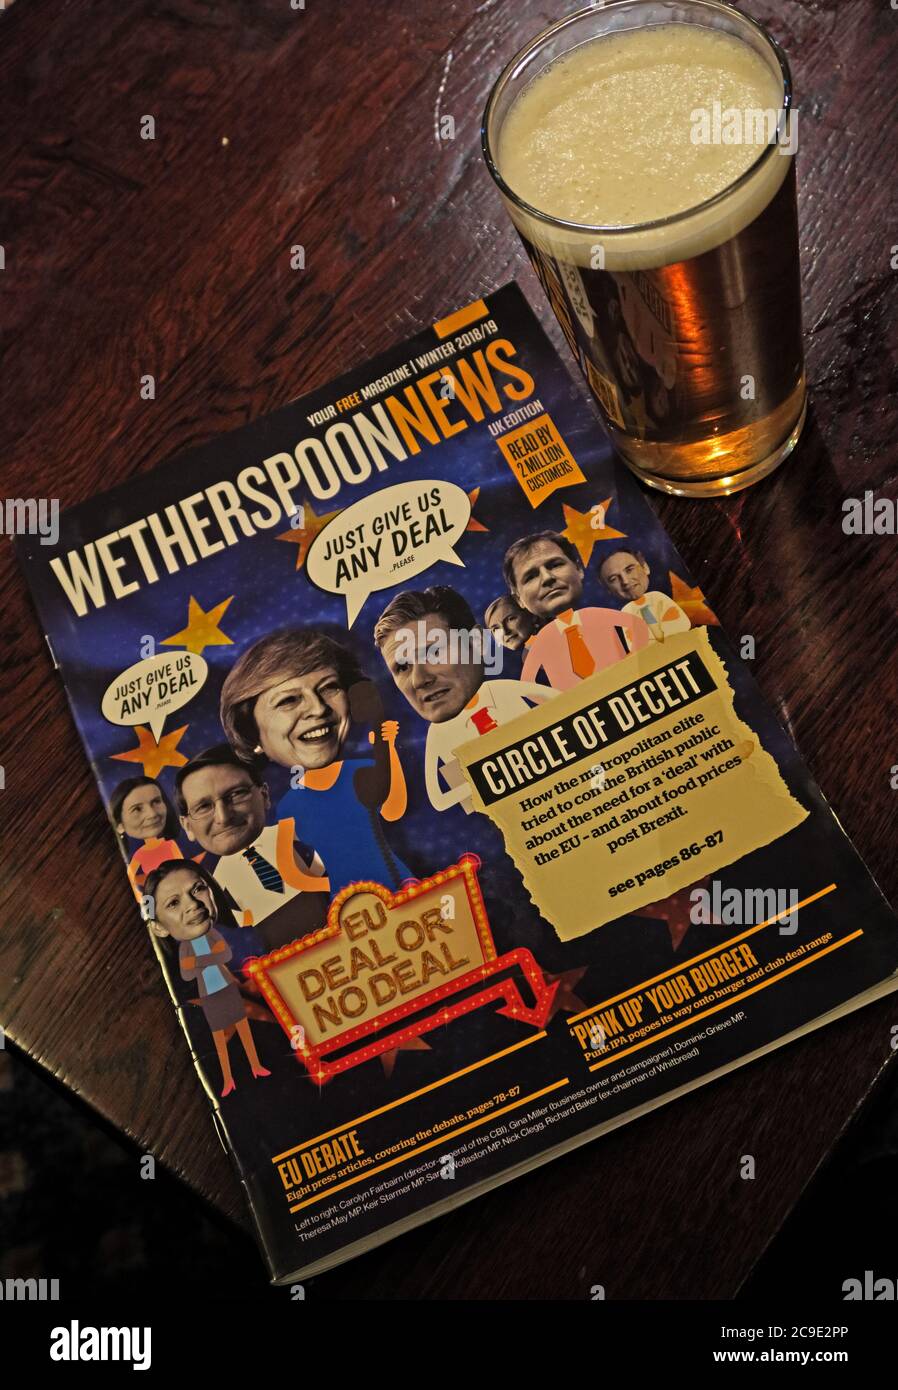 WetherspoonNews Magazine and a Pint of bitter,in a Wetherspoon pub,supporting Brexit Stock Photo